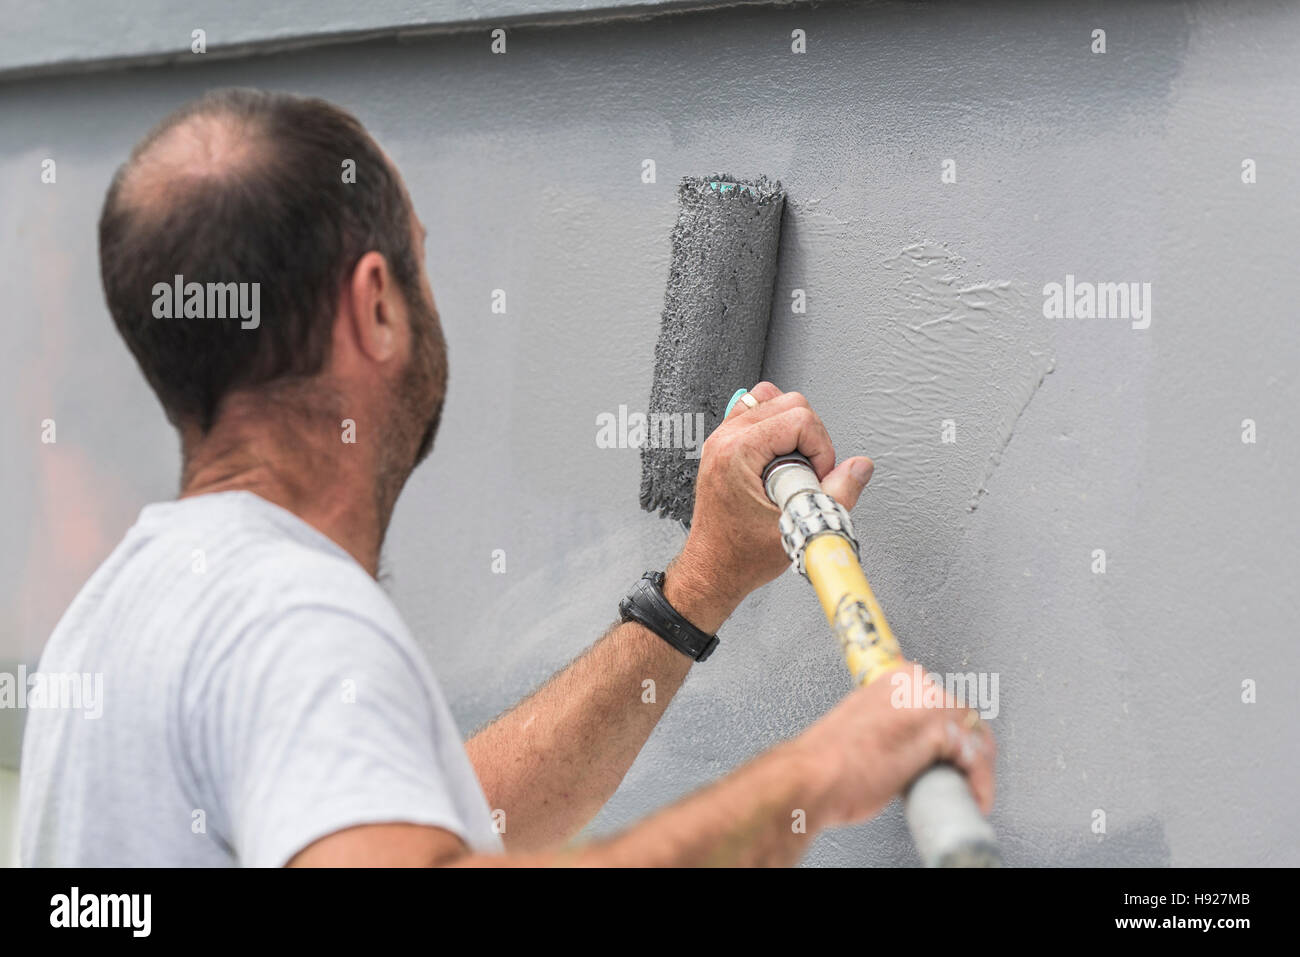 A painter and decorator paints the exterior wall of a house. Stock Photo